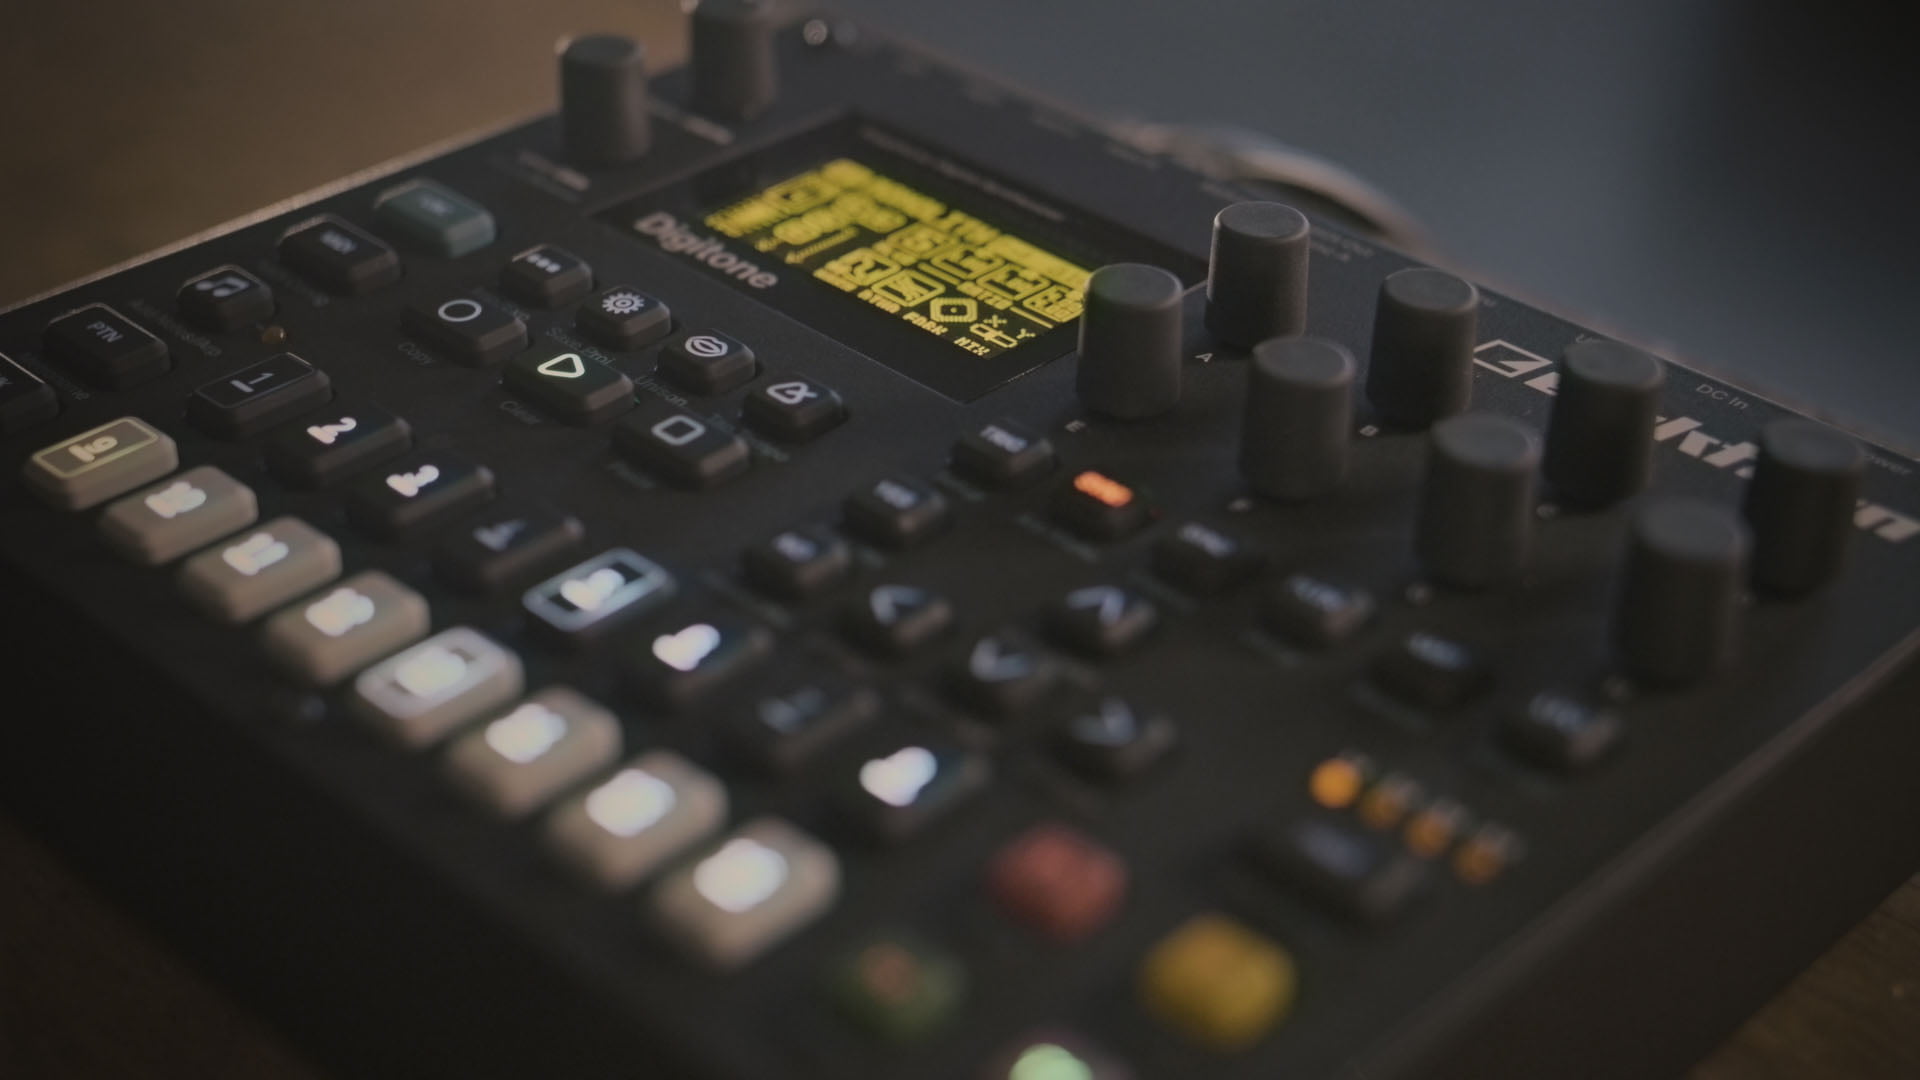 Digitone digital synthesizer by Elektron launched at NAMM